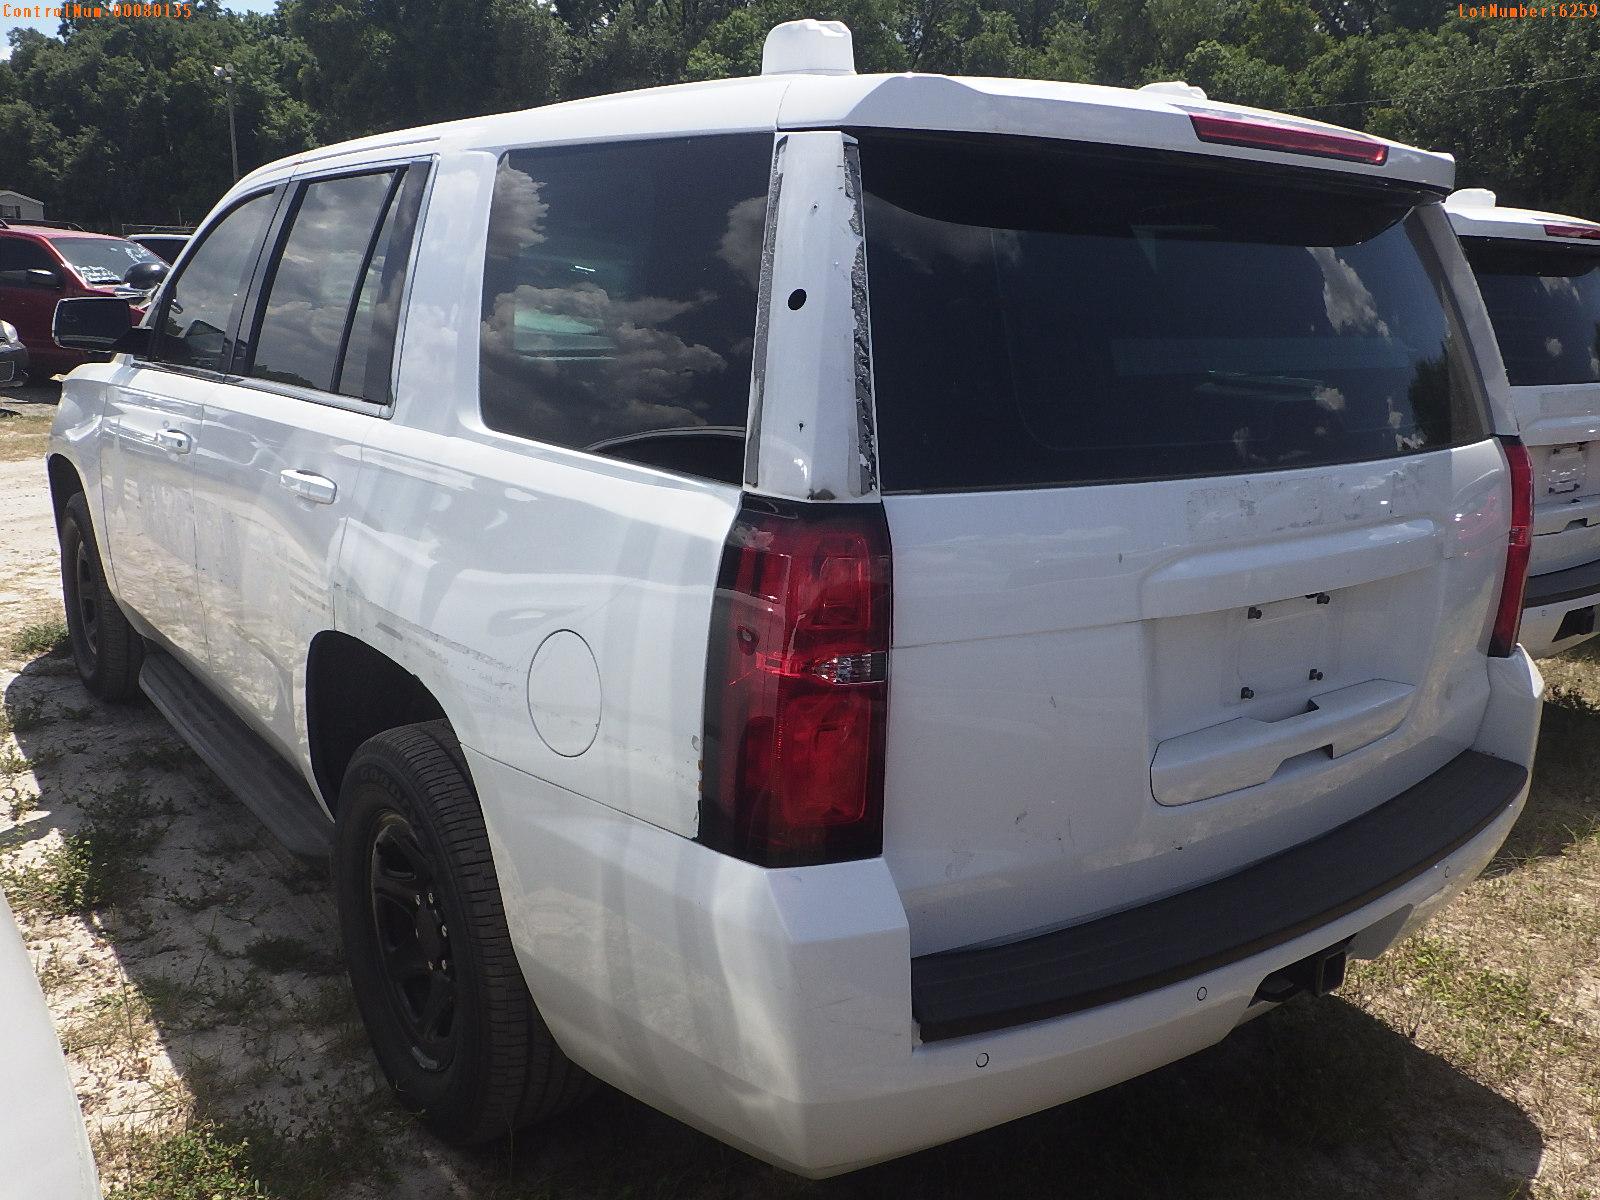 5-06259 (Cars-SUV 4D)  Seller: Gov-Pinellas County Sheriffs Ofc 2015 CHEV TAHOE